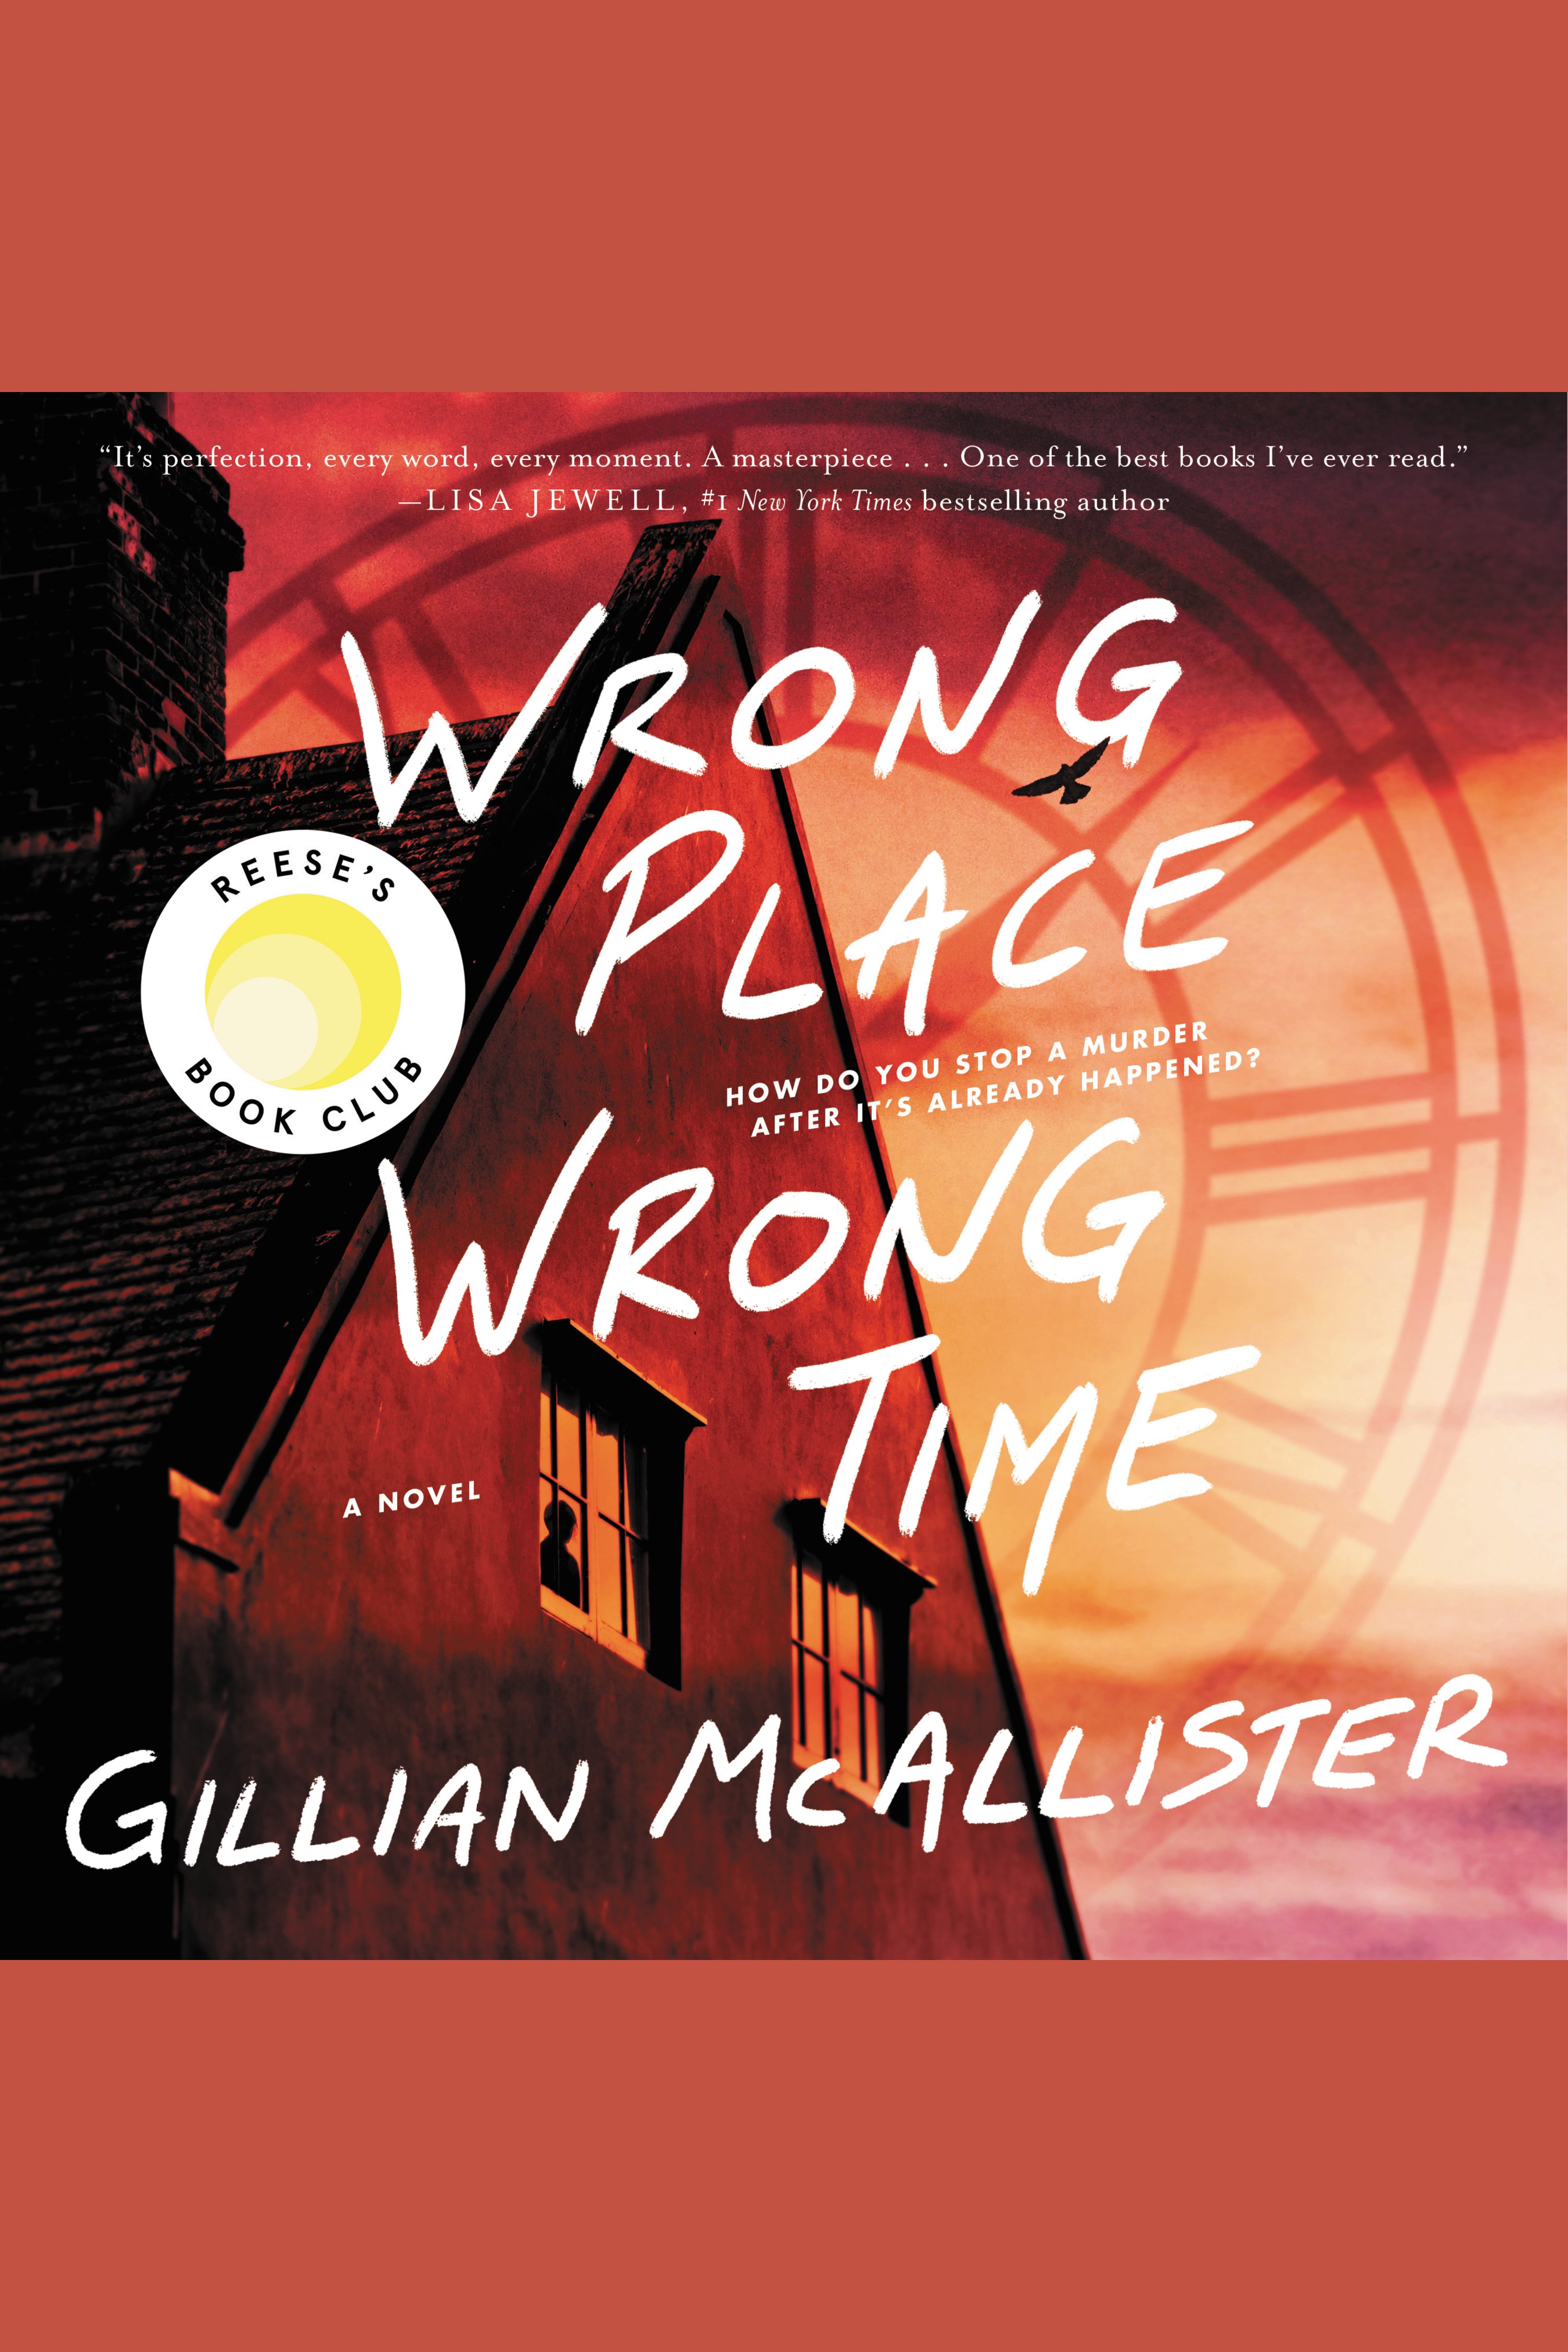 Wrong Place Wrong Time cover image